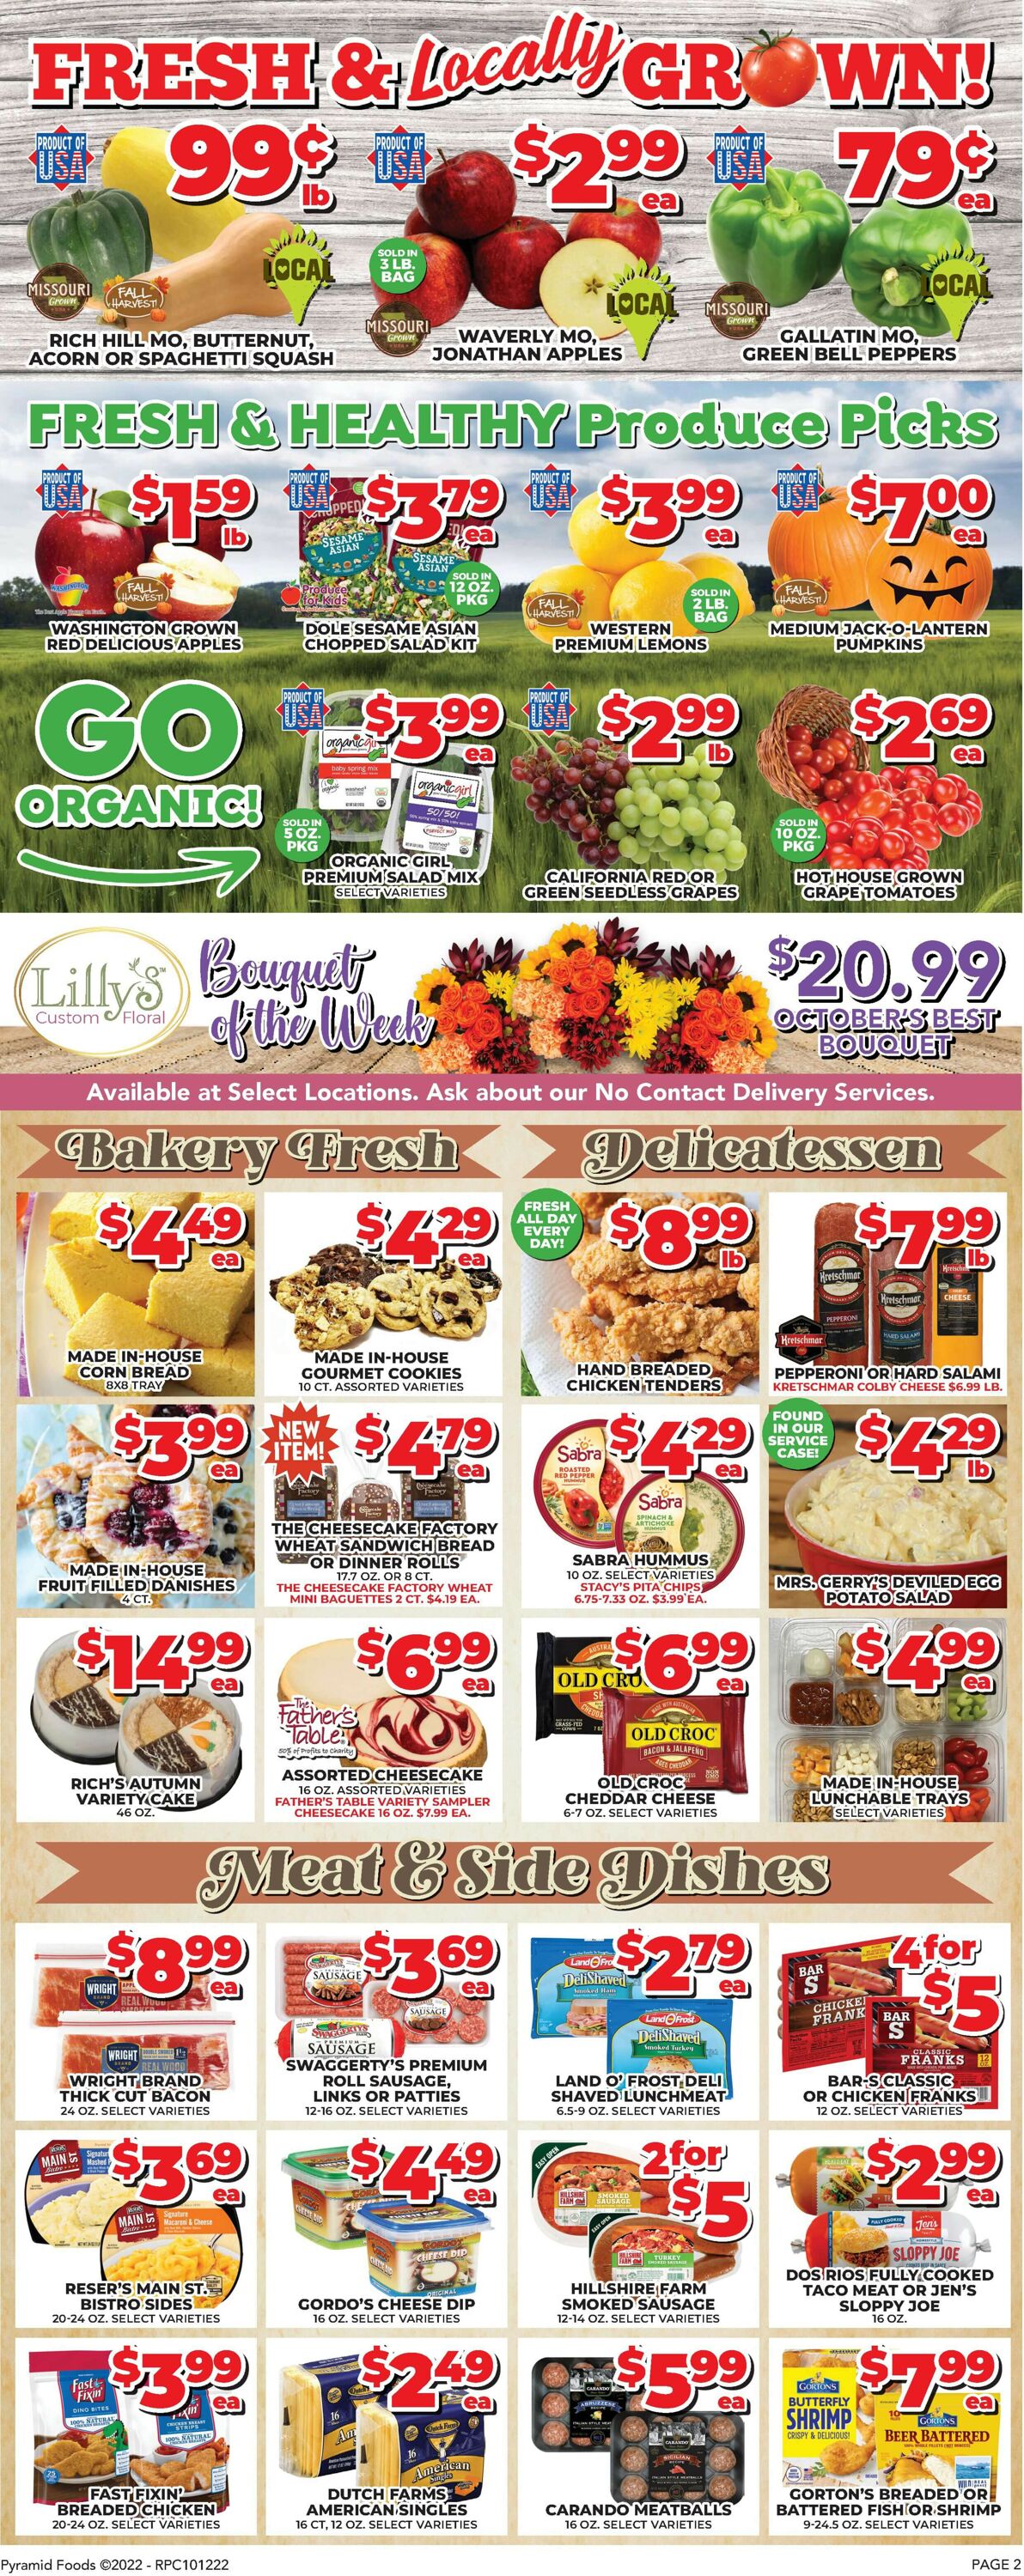 Price Cutter Weekly Ad Circular - valid 10/12-10/18/2022 (Page 2)